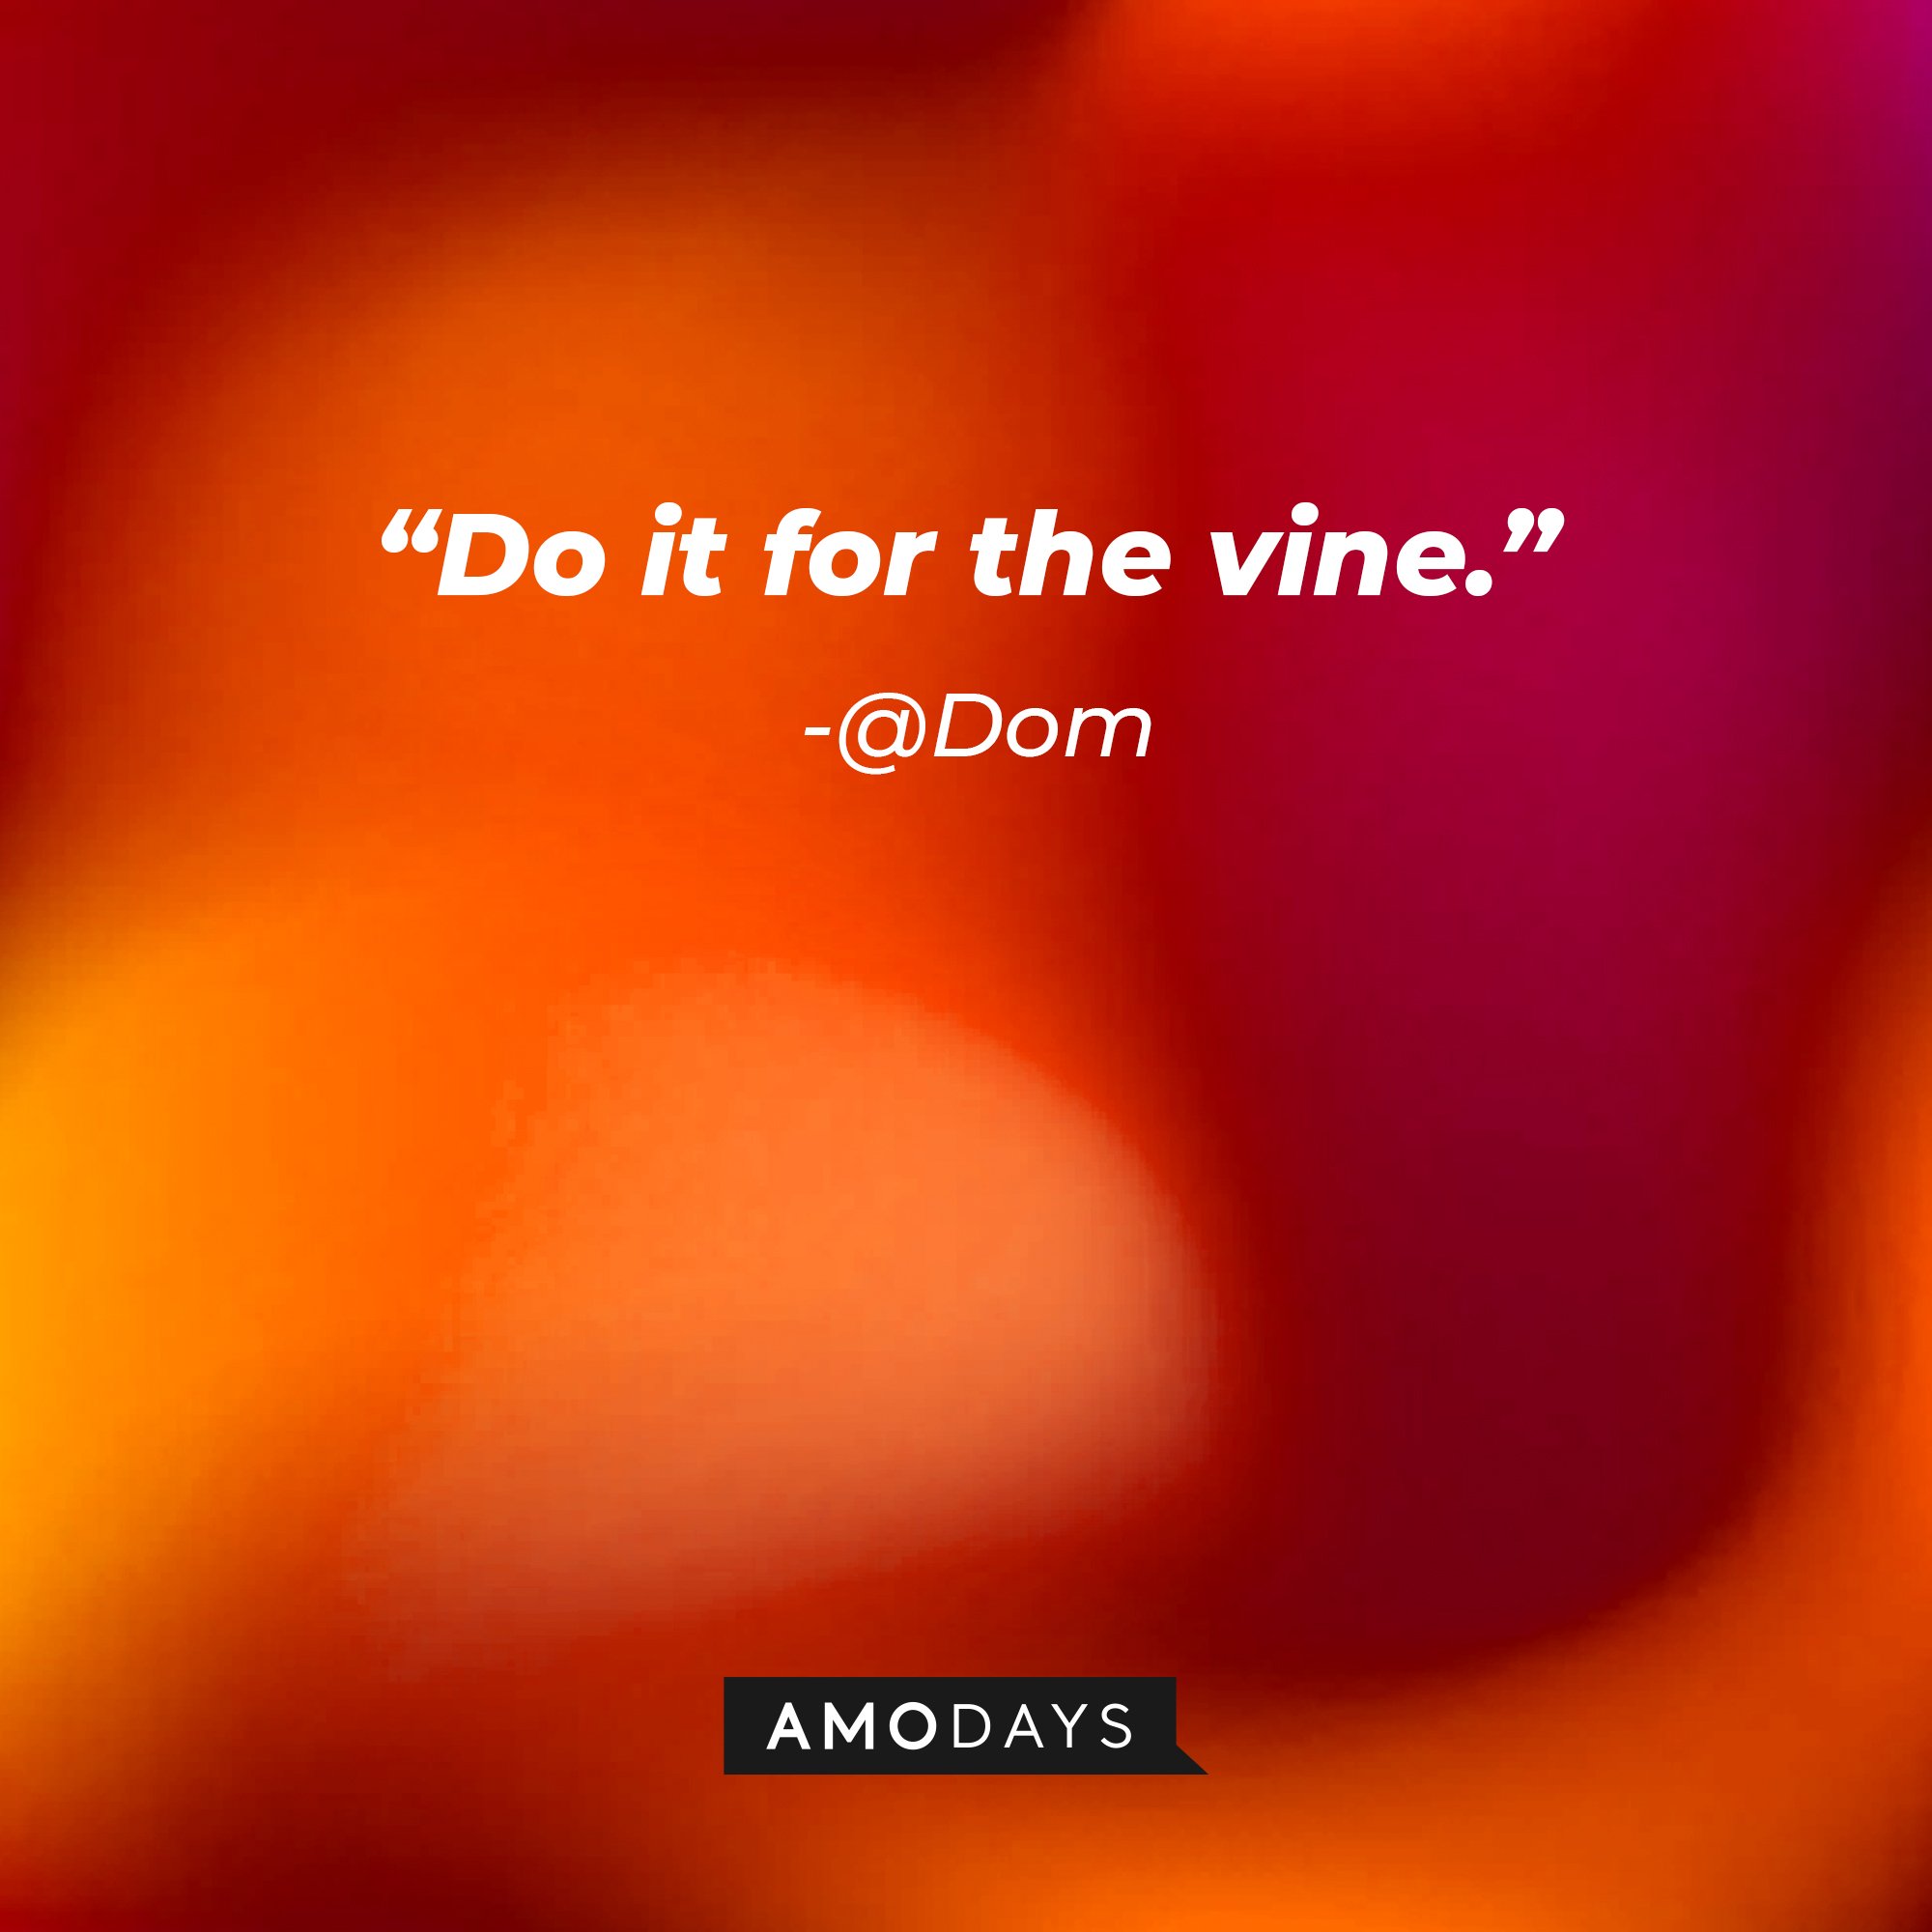 @Dom's quote: “Do it for the vine.” | Image: AmoDays